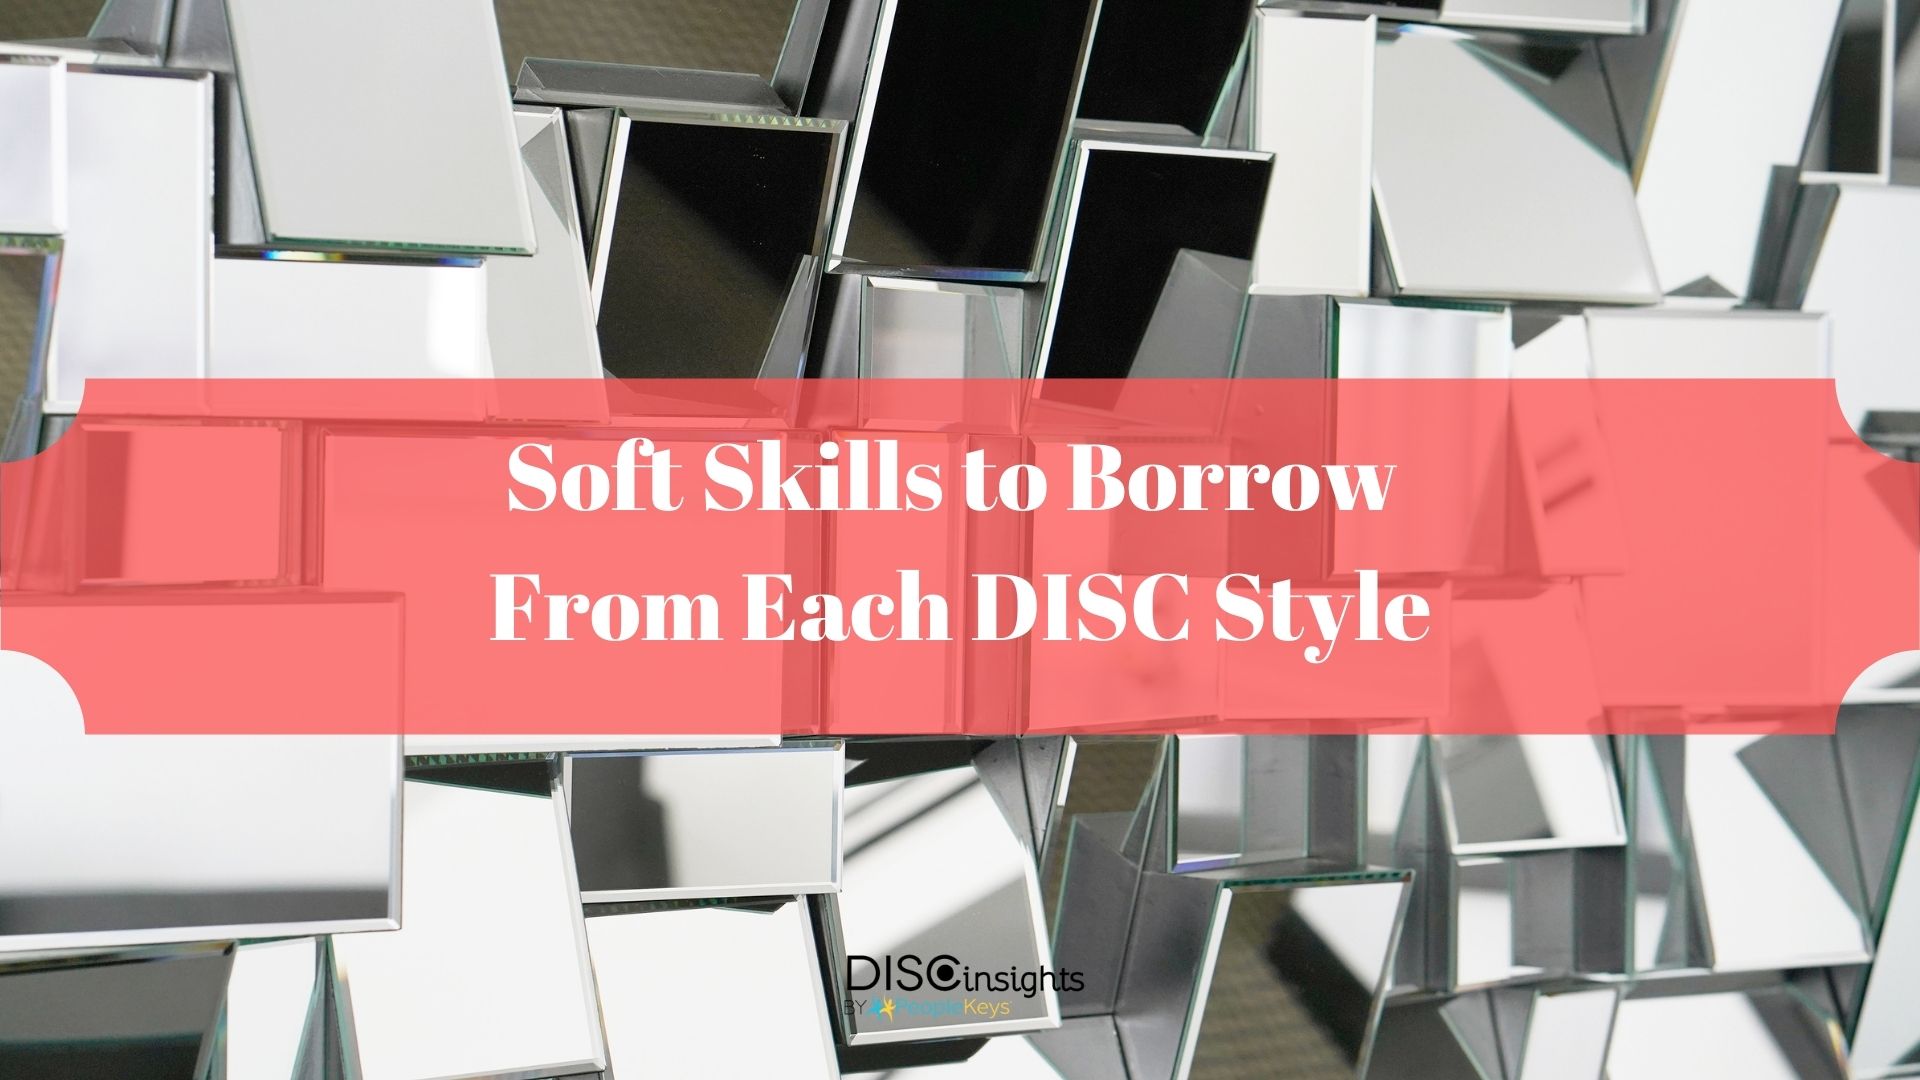 Soft Skills to Borrow From Each DISC Style